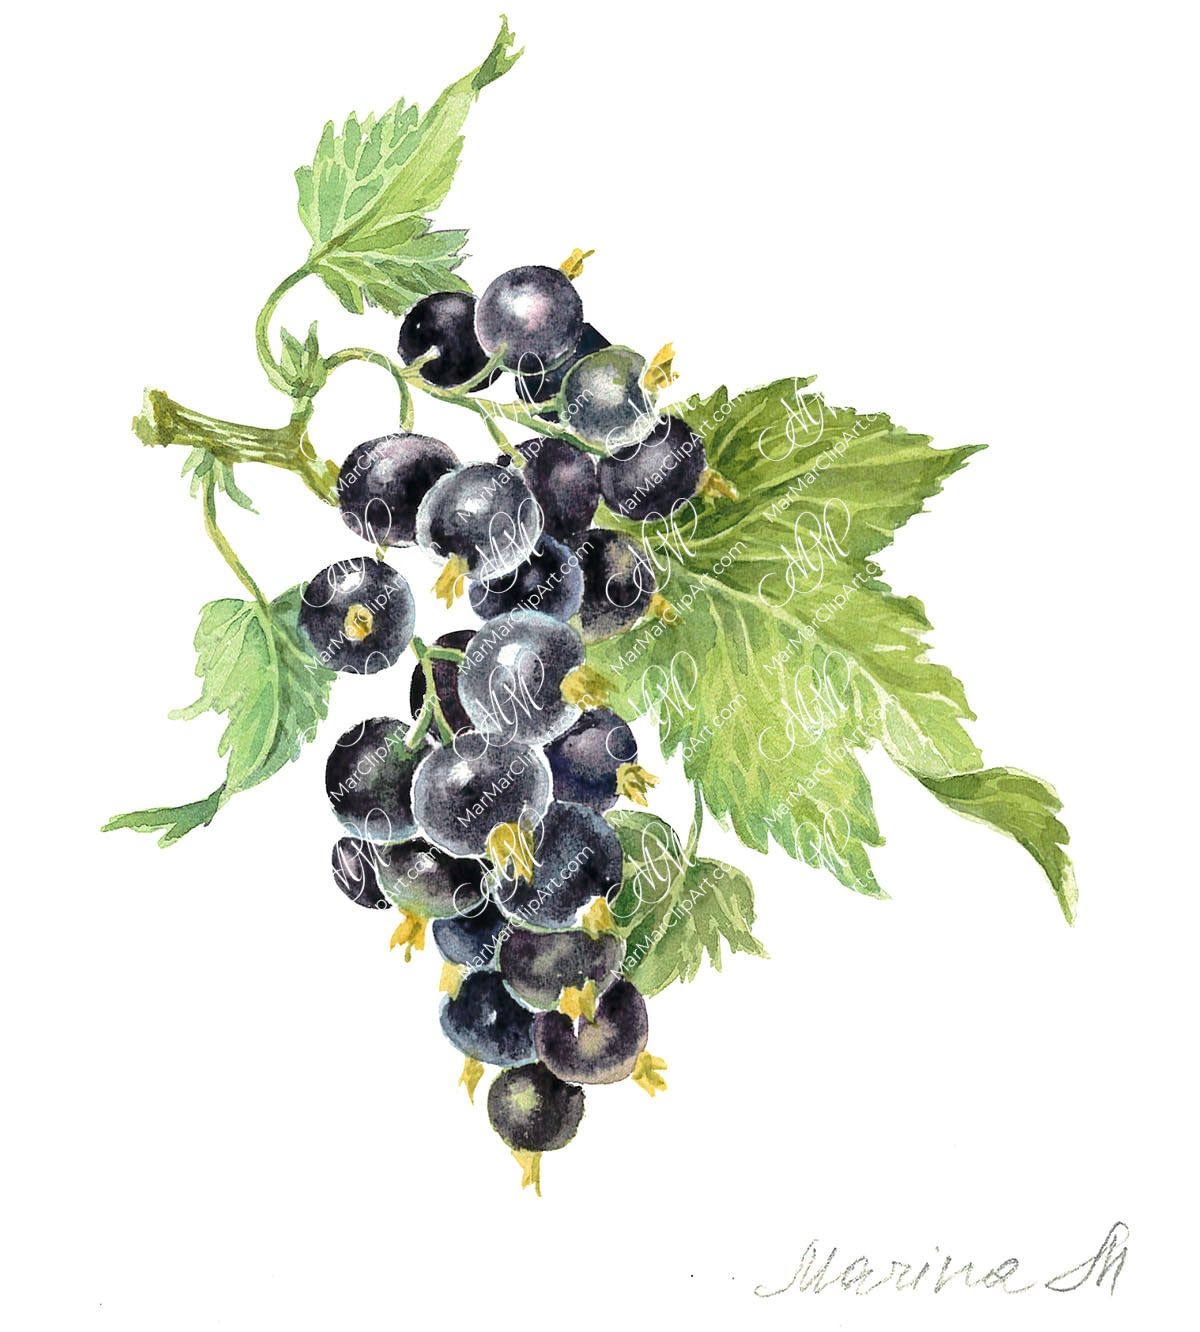 Black ribes. Isolated on white background with work path. Watercolor. 30x33 cm. ribes.jpg 4Mb. RGB. 300 px. Instant download.